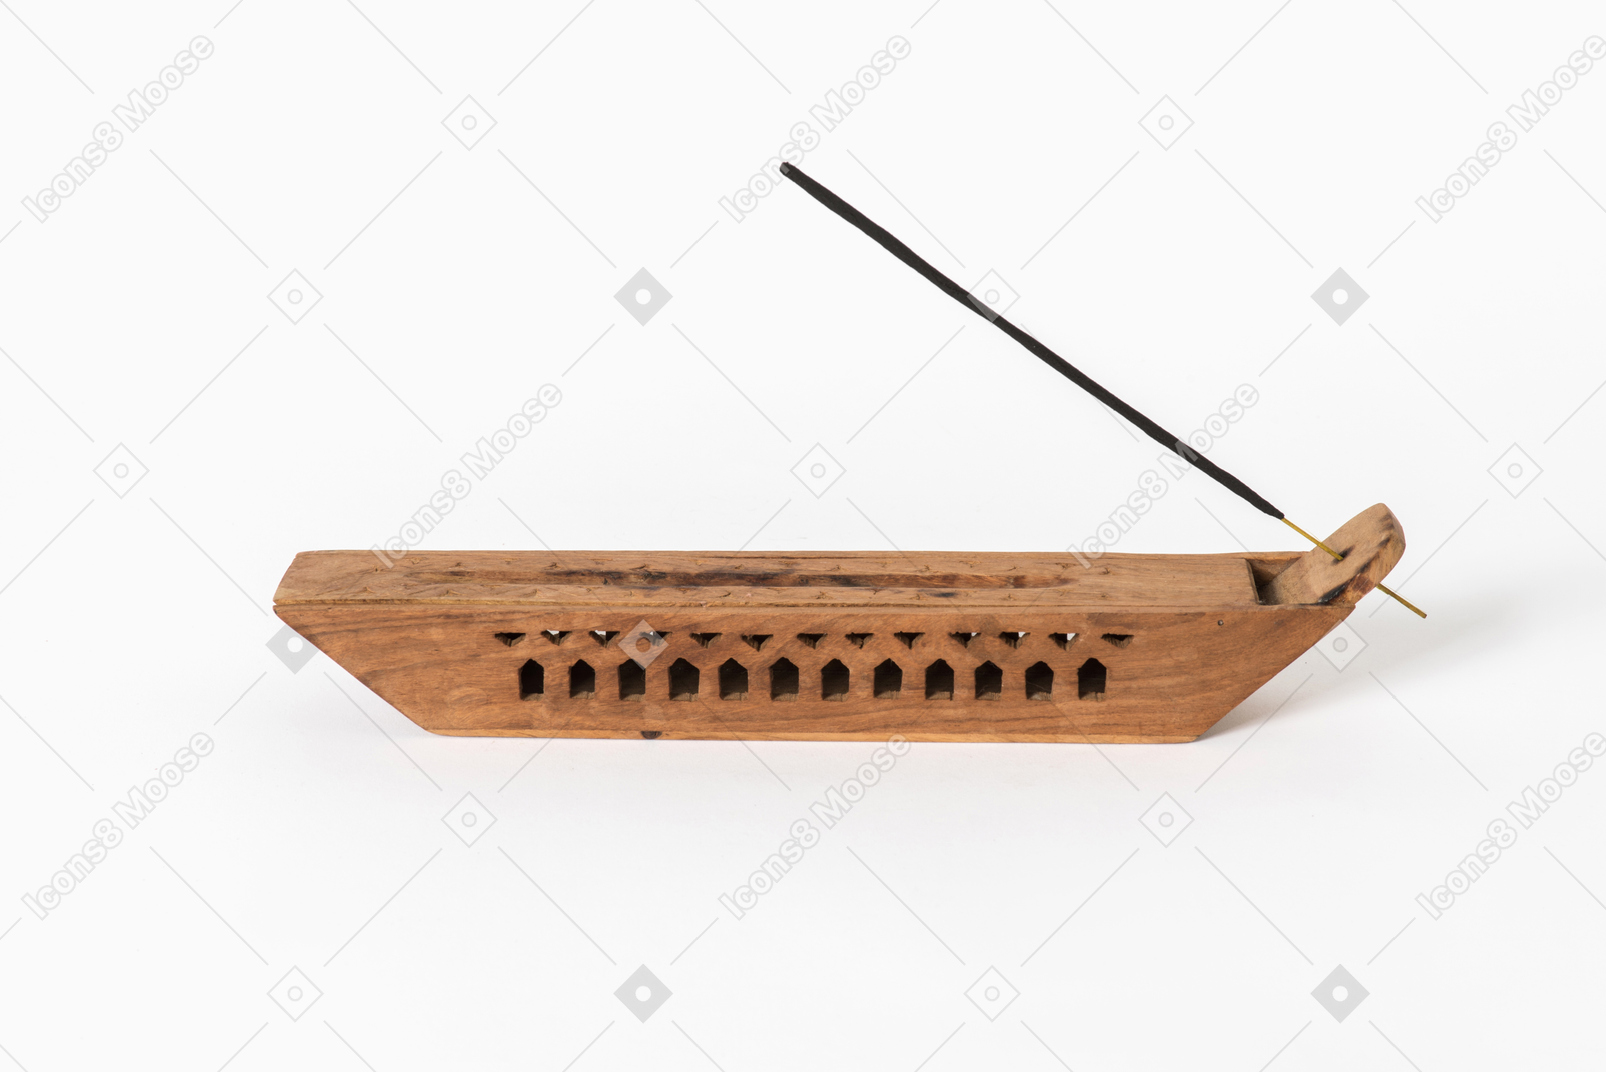 Incense stick stock in wooden boat